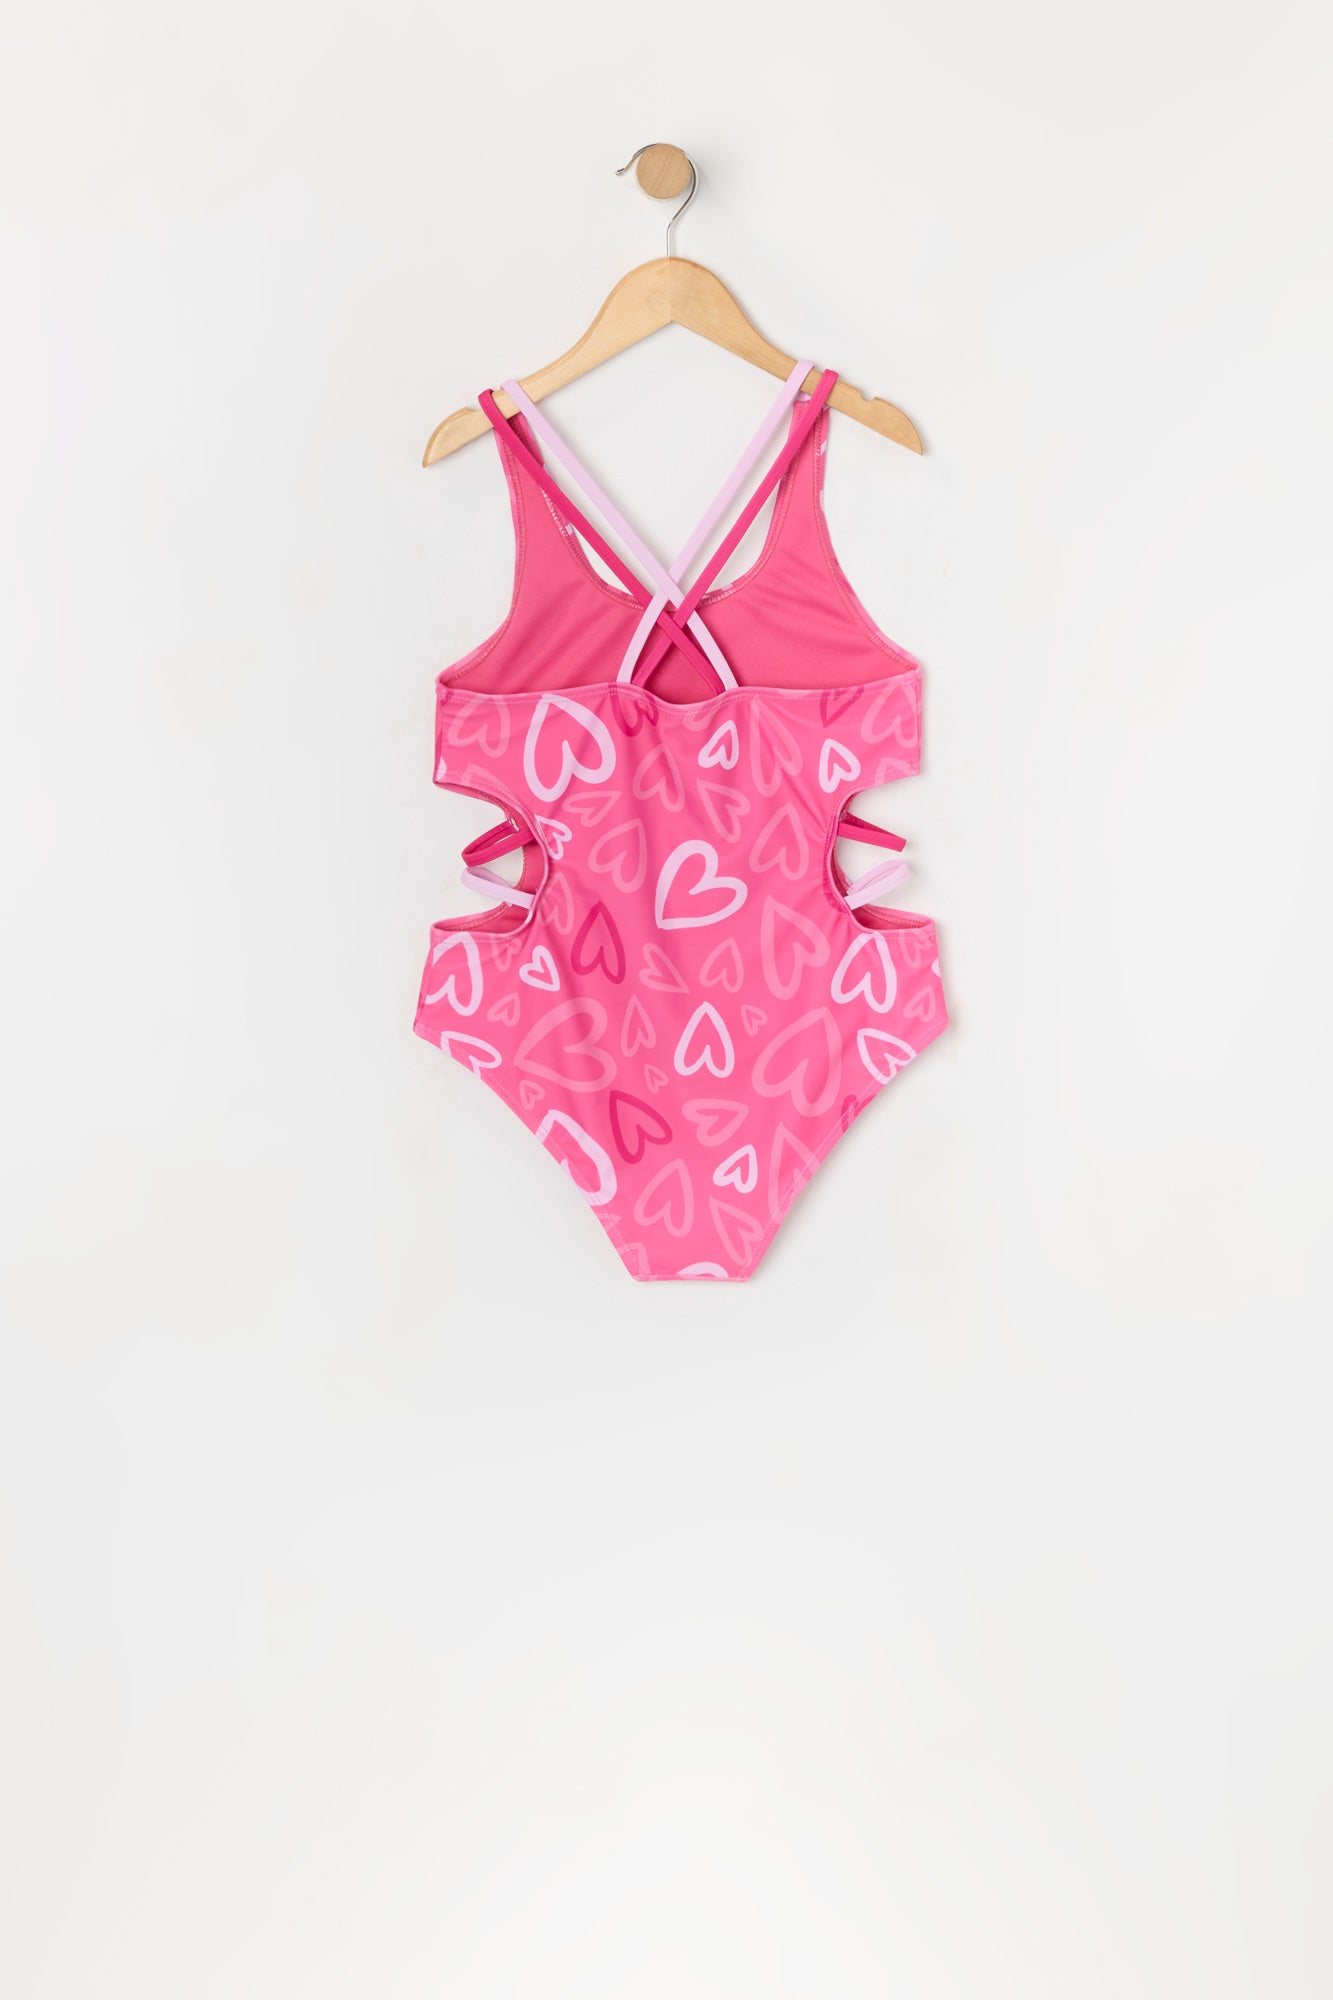 Girls Heart Print Strappy One Piece Swimsuit with built-in cups